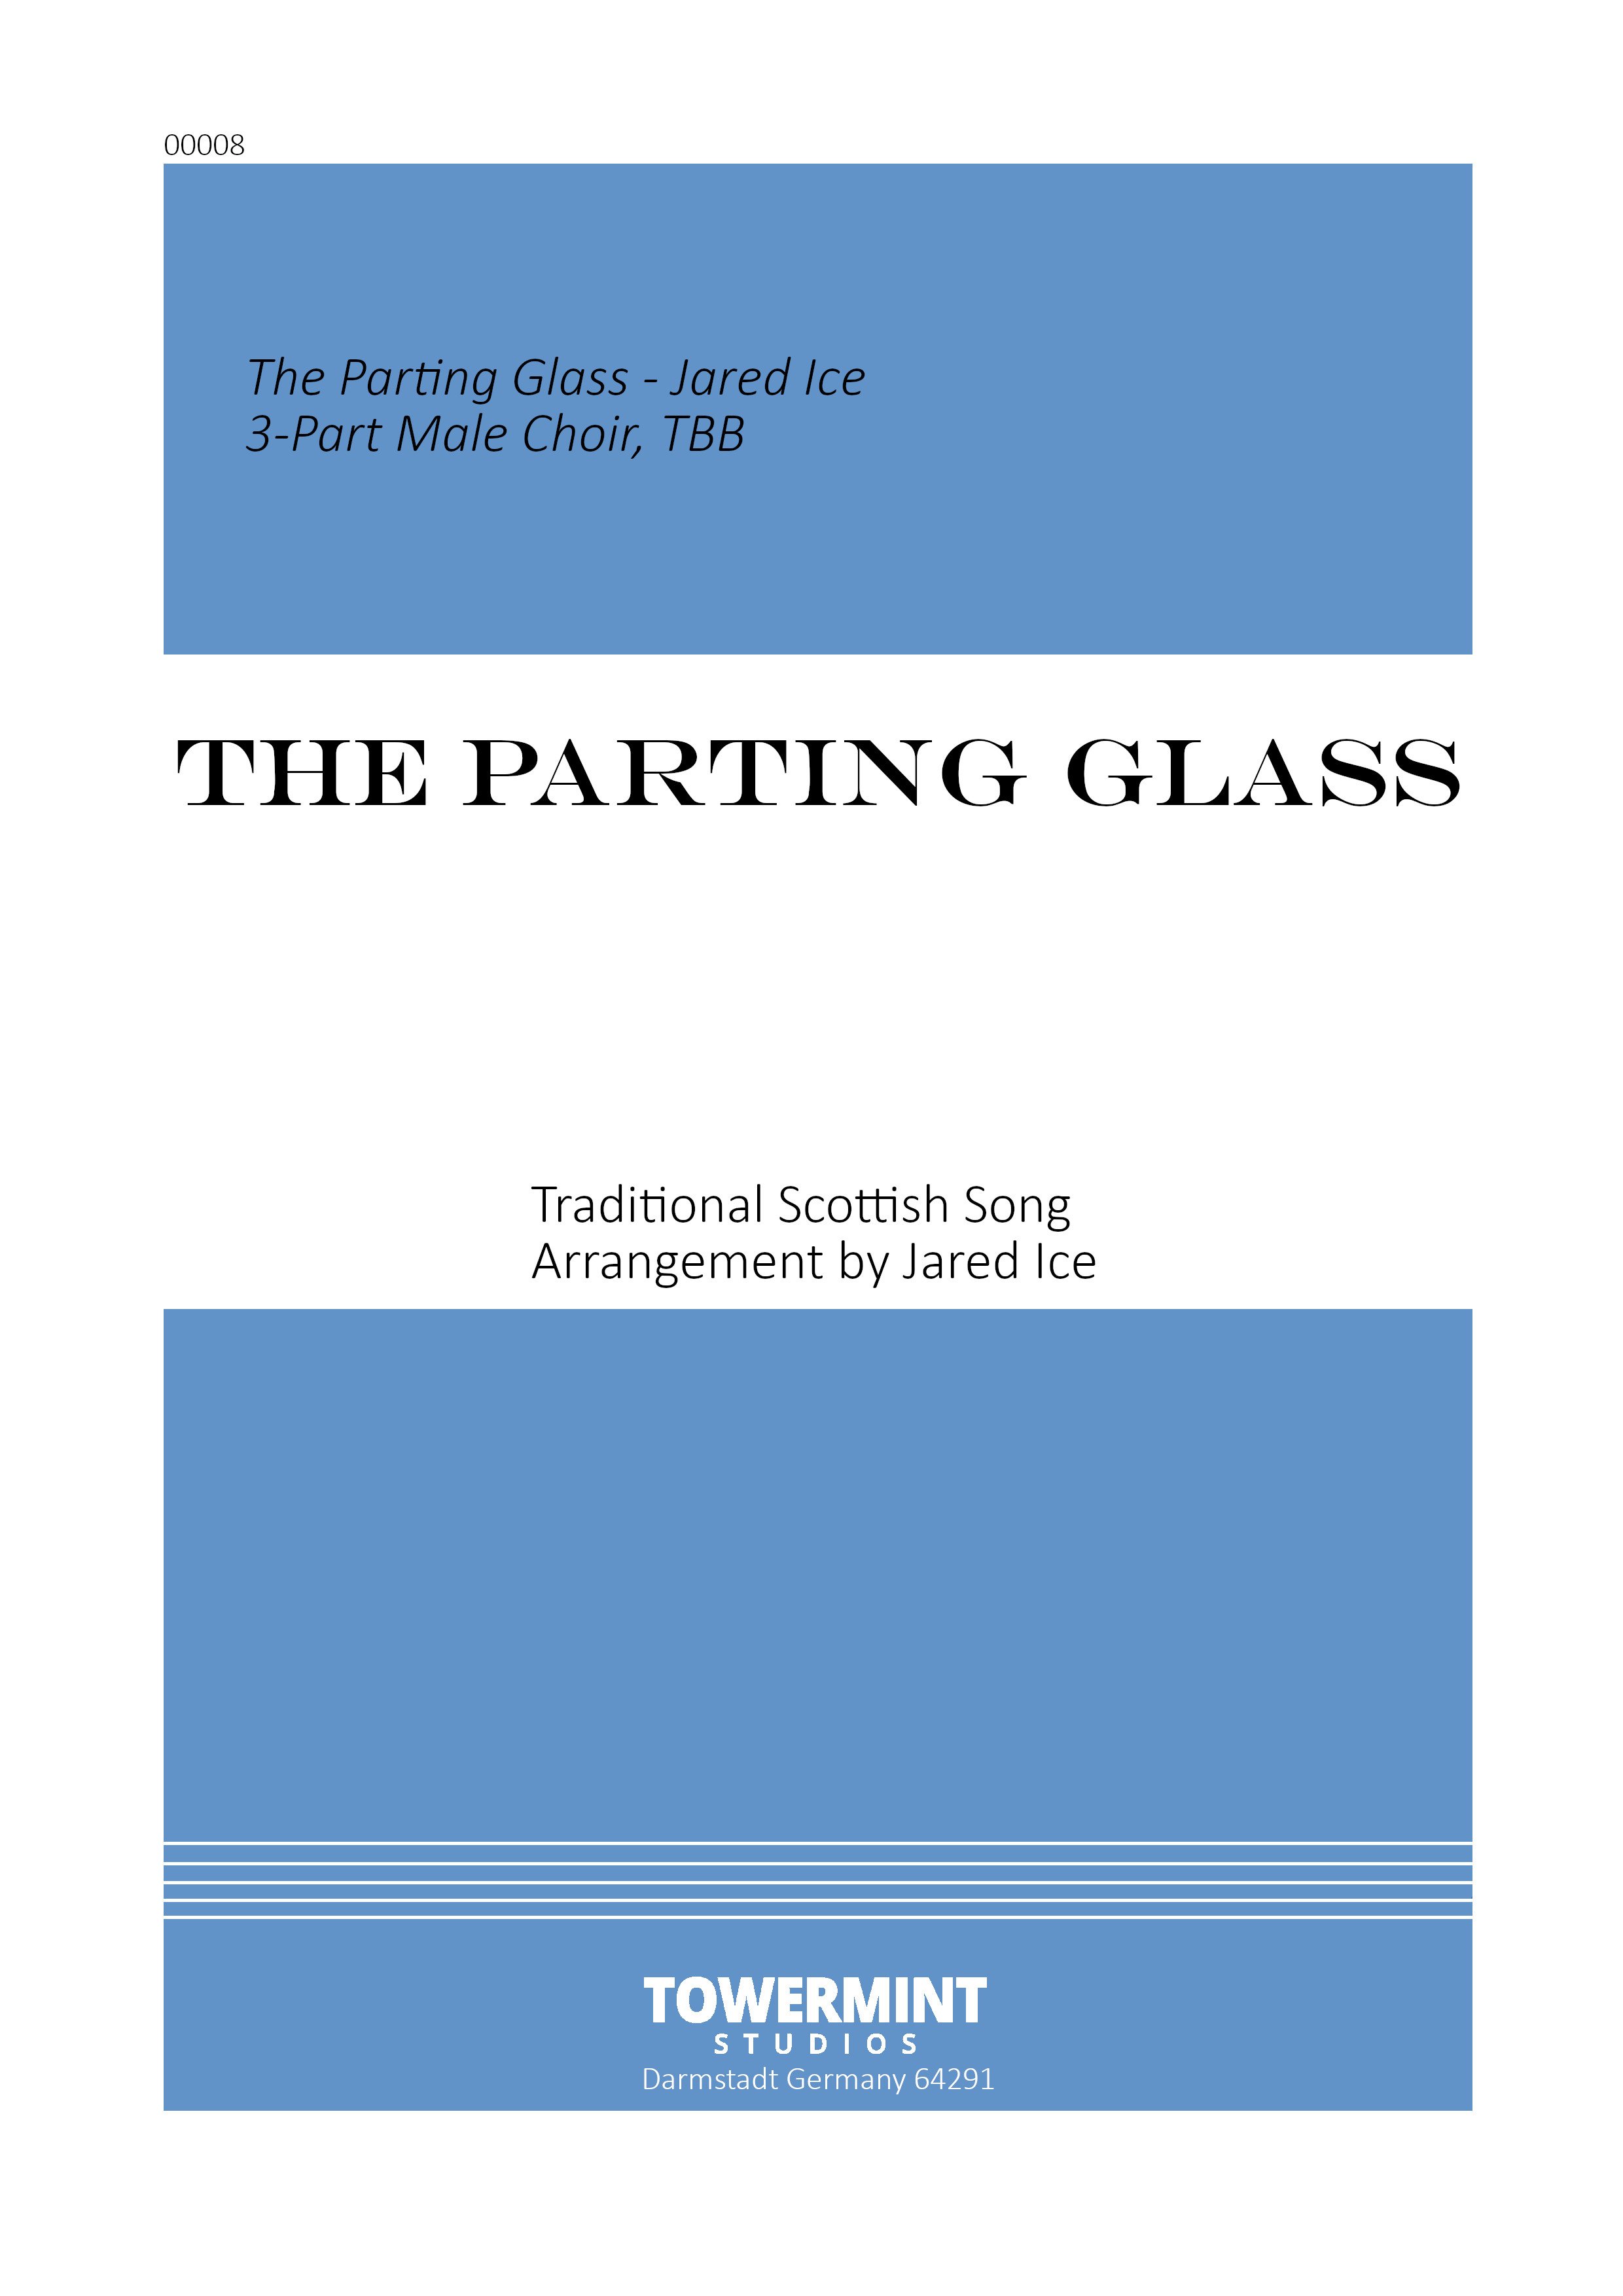 The Parting Glass Cover.jpg